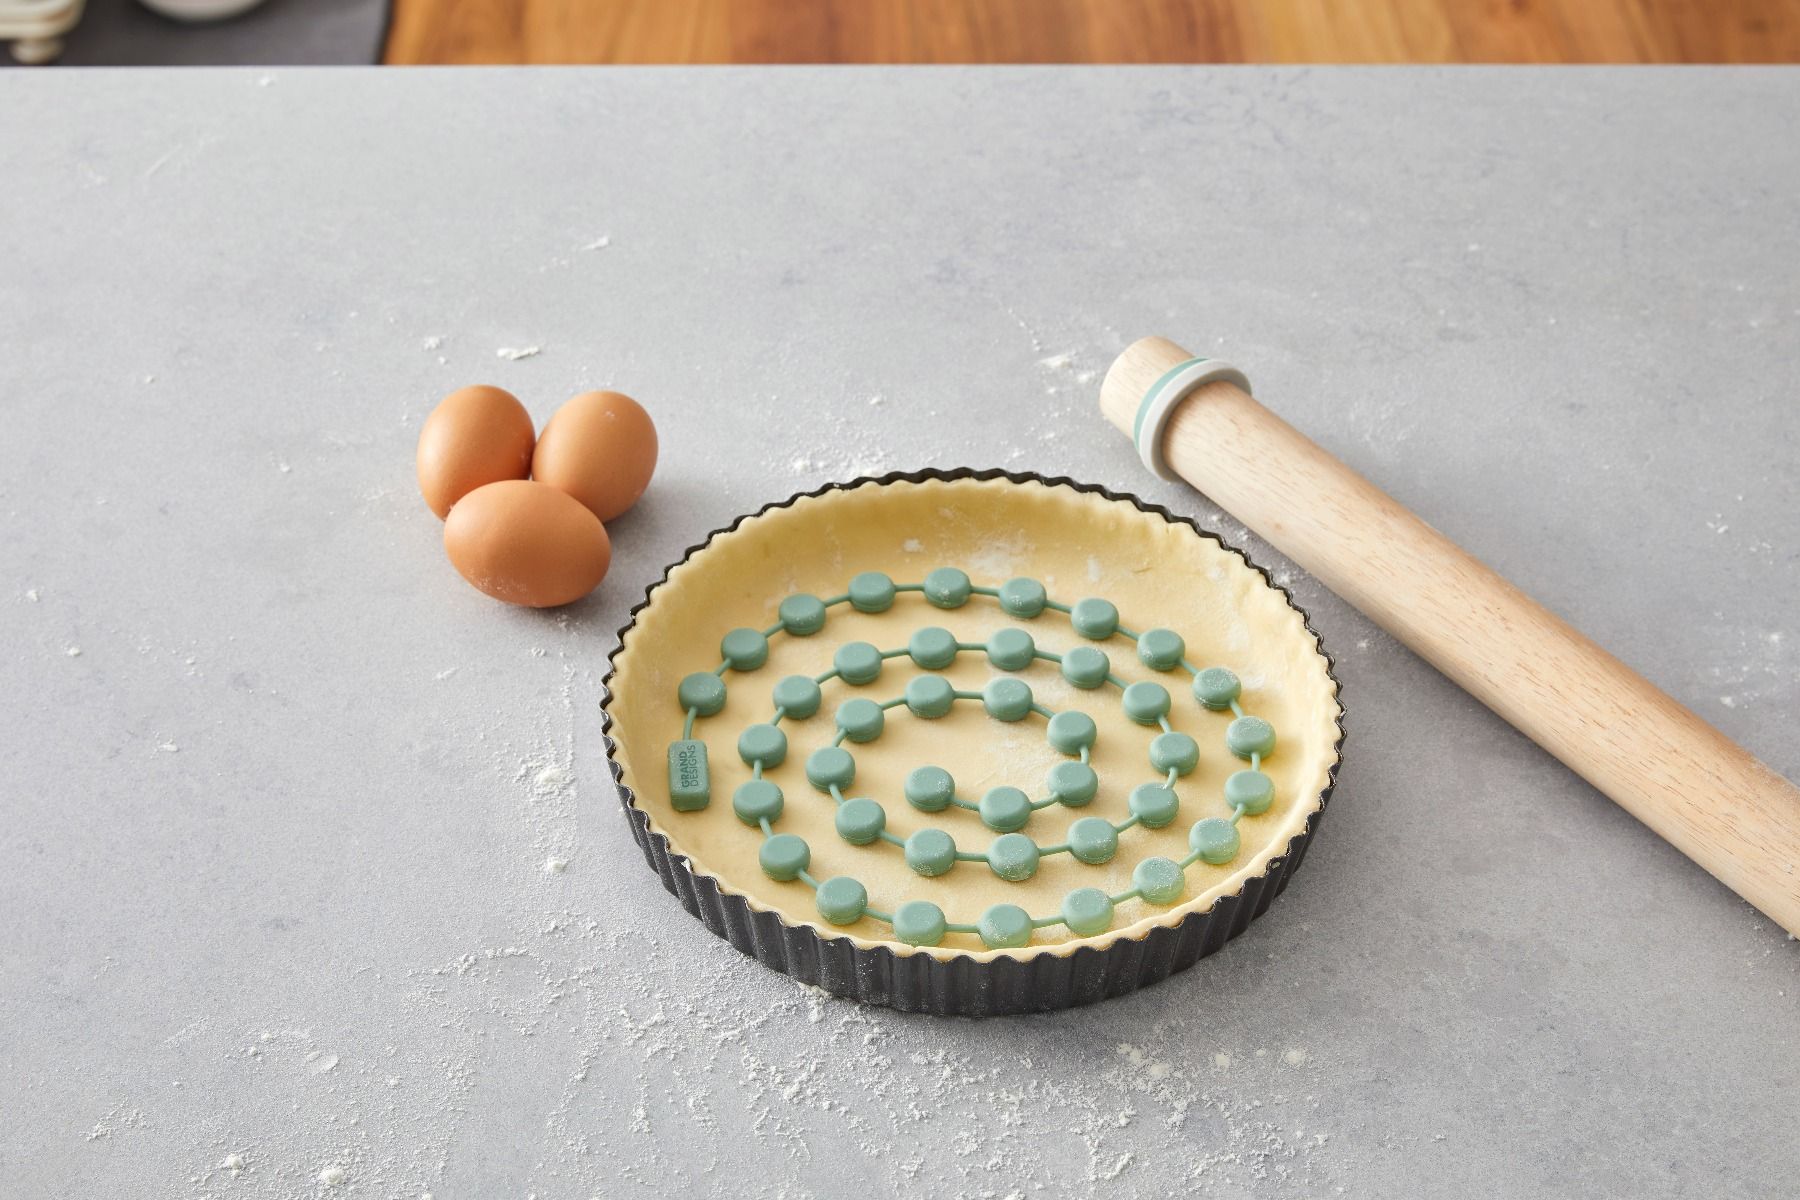 Grand Designs 2-in-1 Pie Weight & Trivet Product Image 2